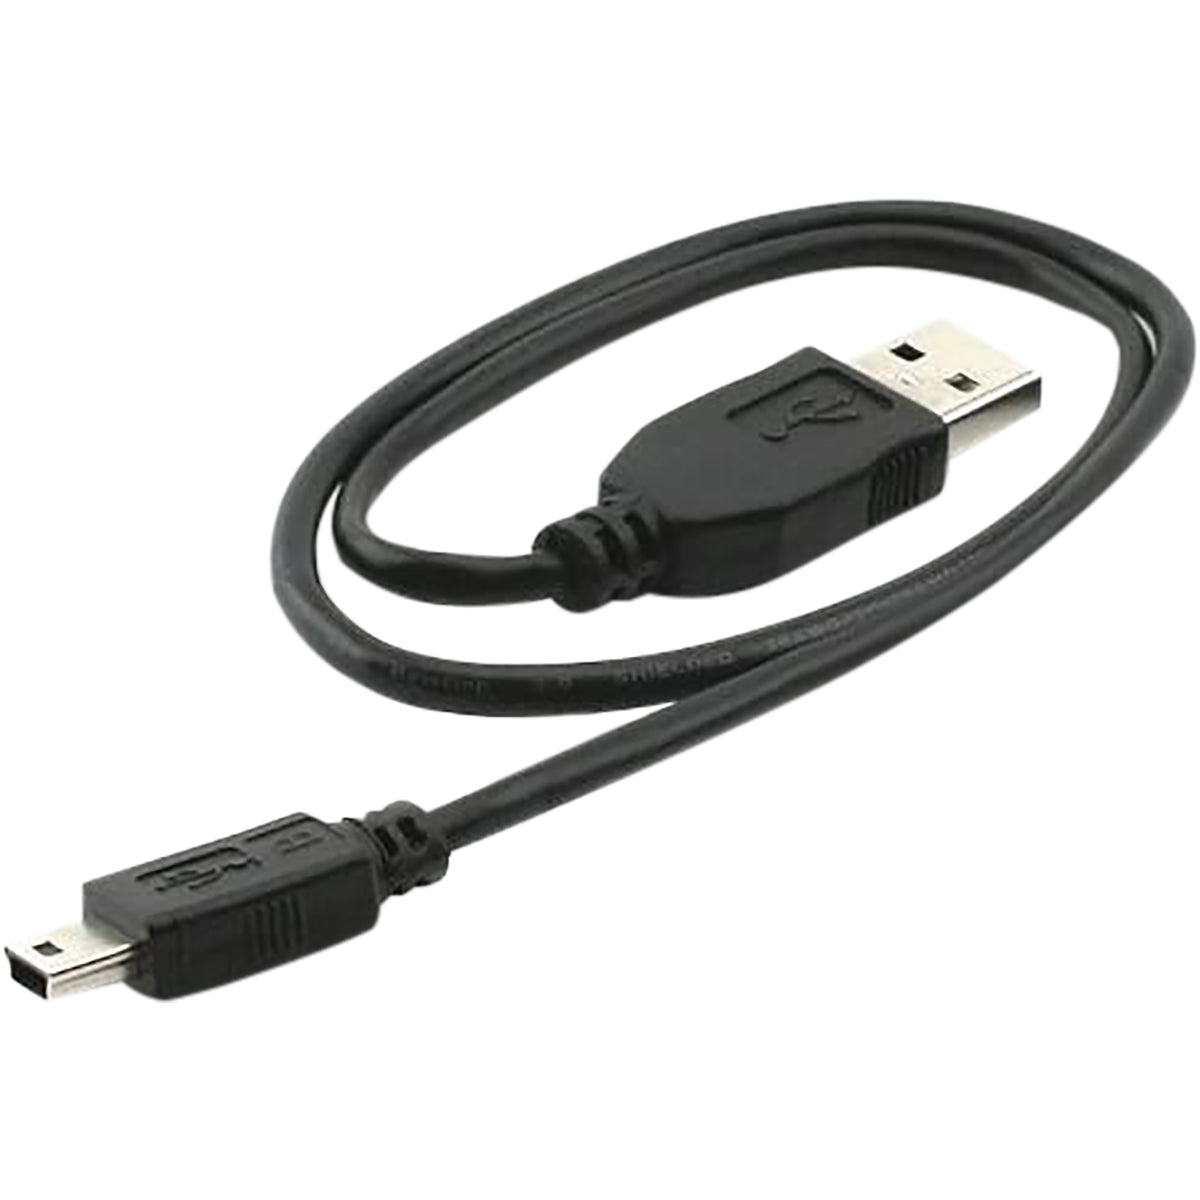 Replay XD 480 Mini 8 Pin USB Charge Data Cable Accessories-30-RPXD480